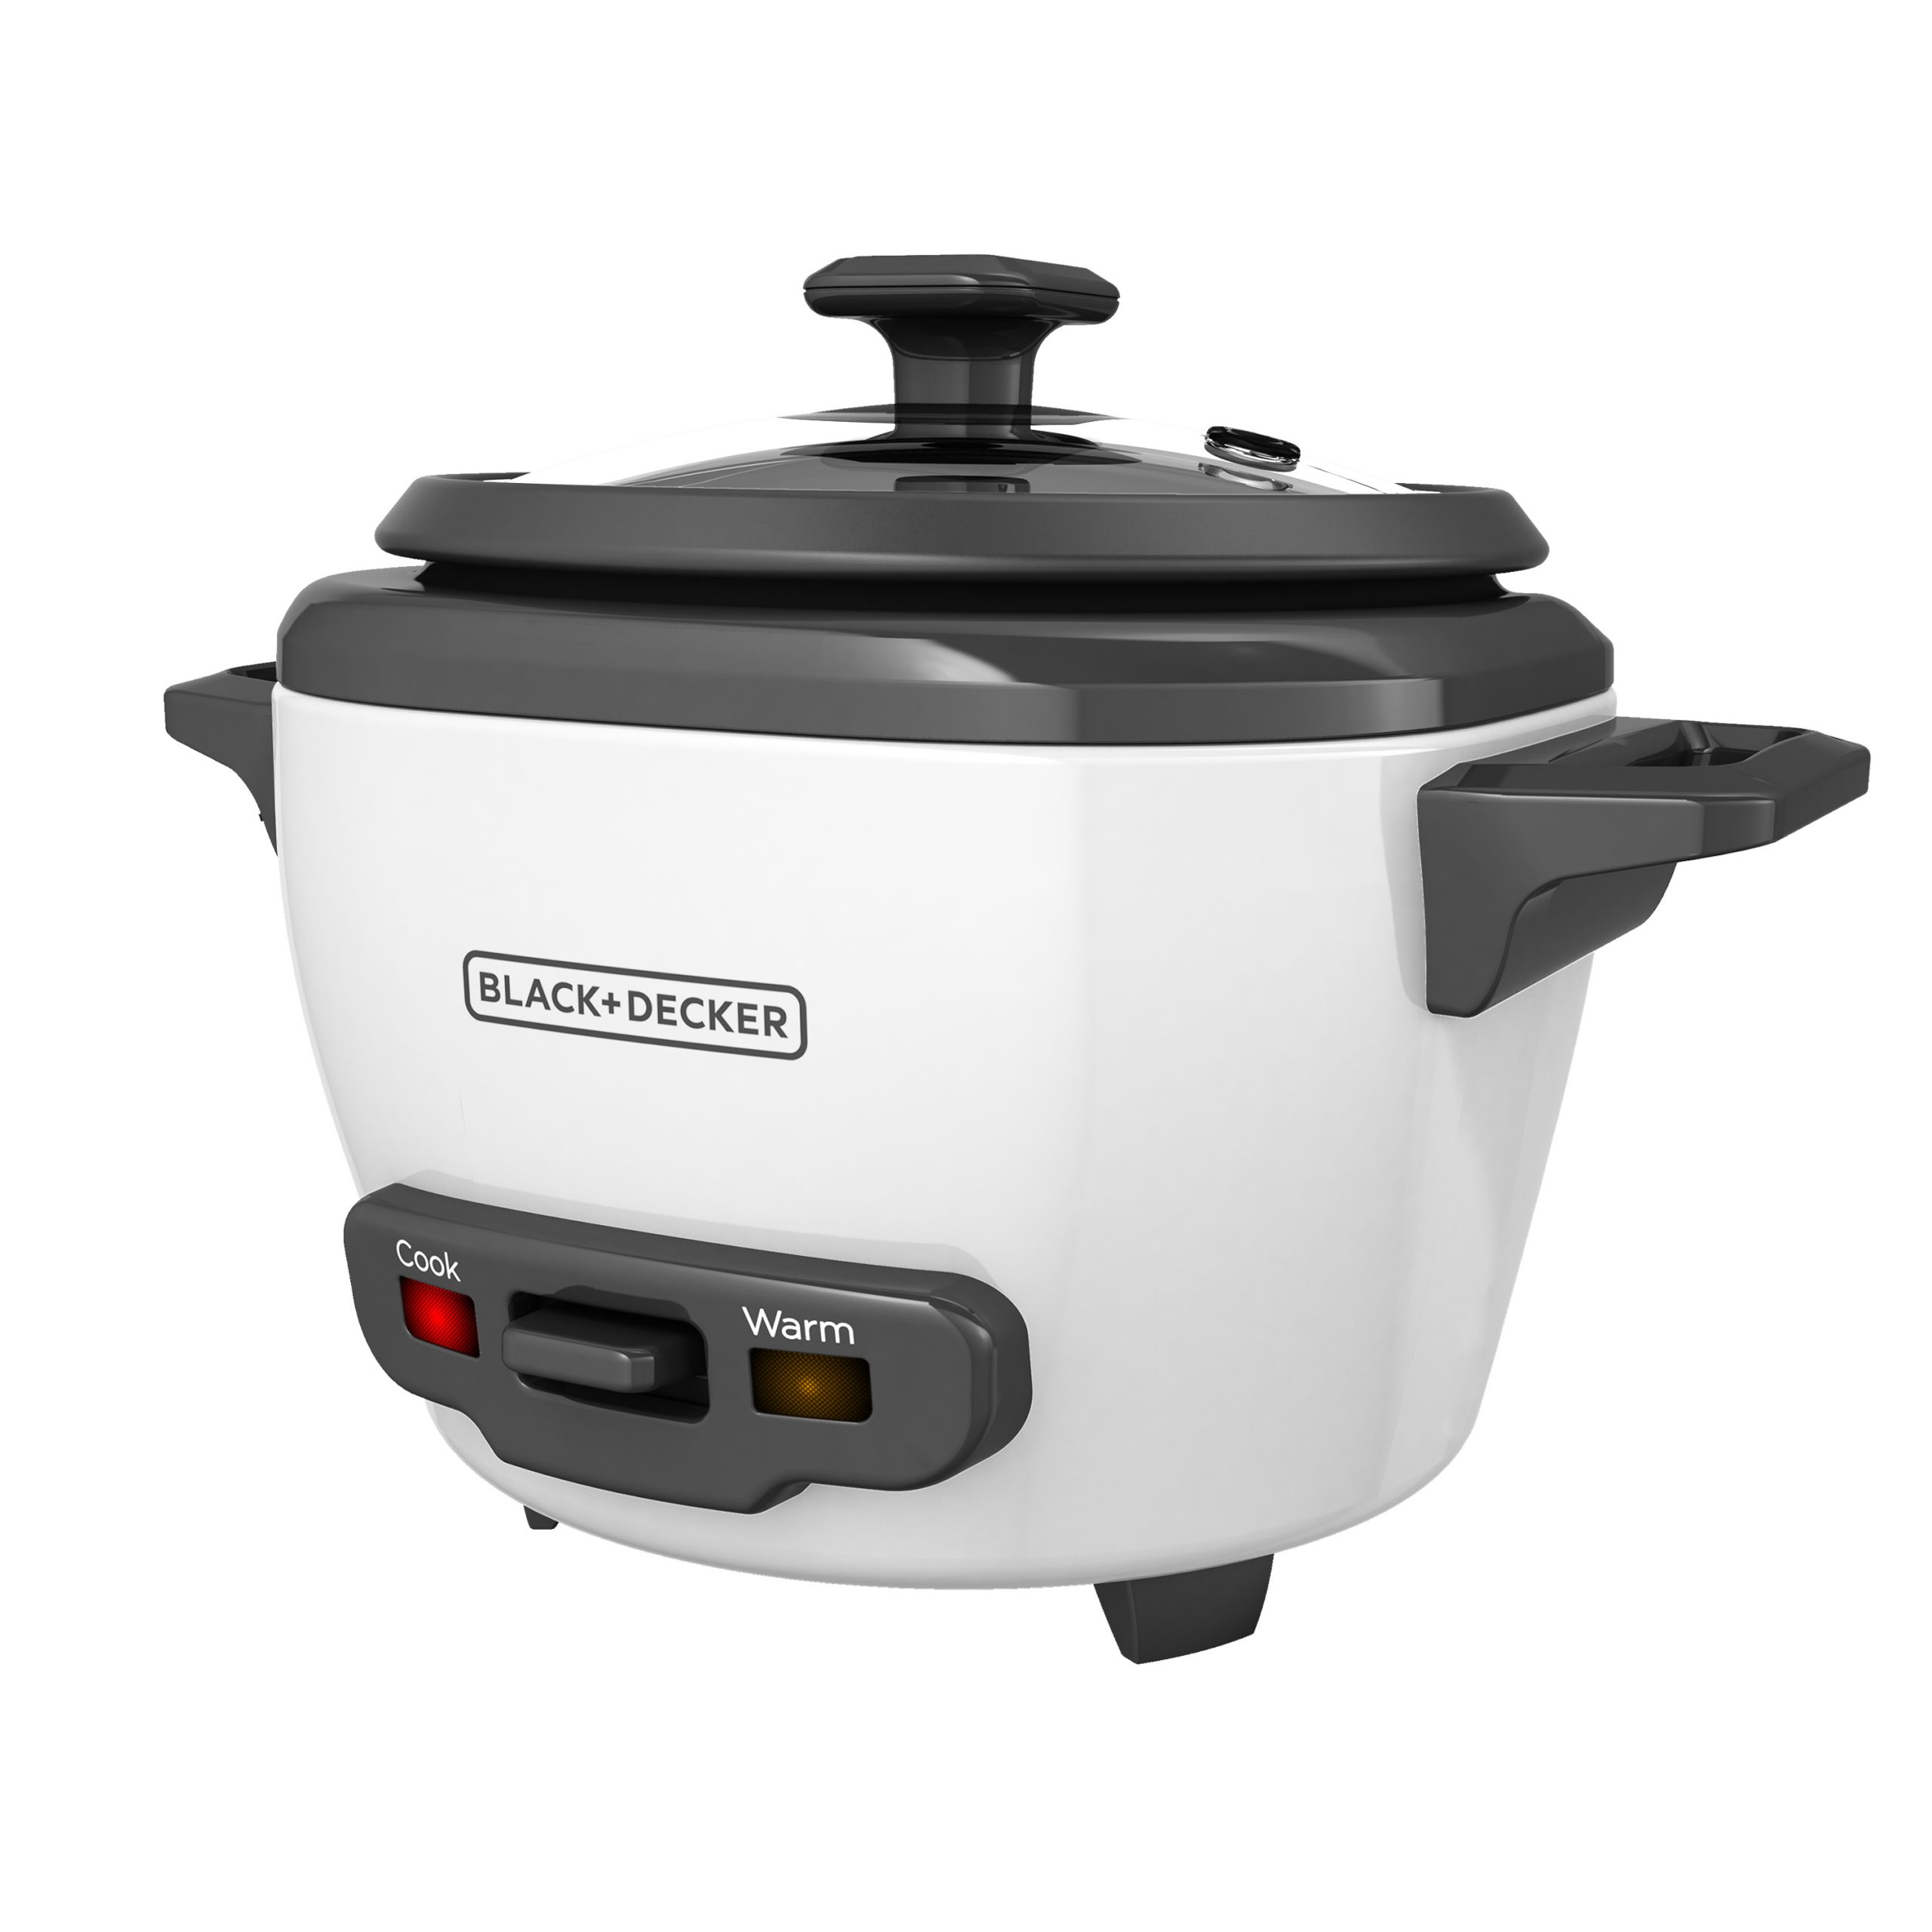 BLACK & DECKER 16 CUP WHITE RICE COOKER KEEP WARM NON STICK TEMPERED ...